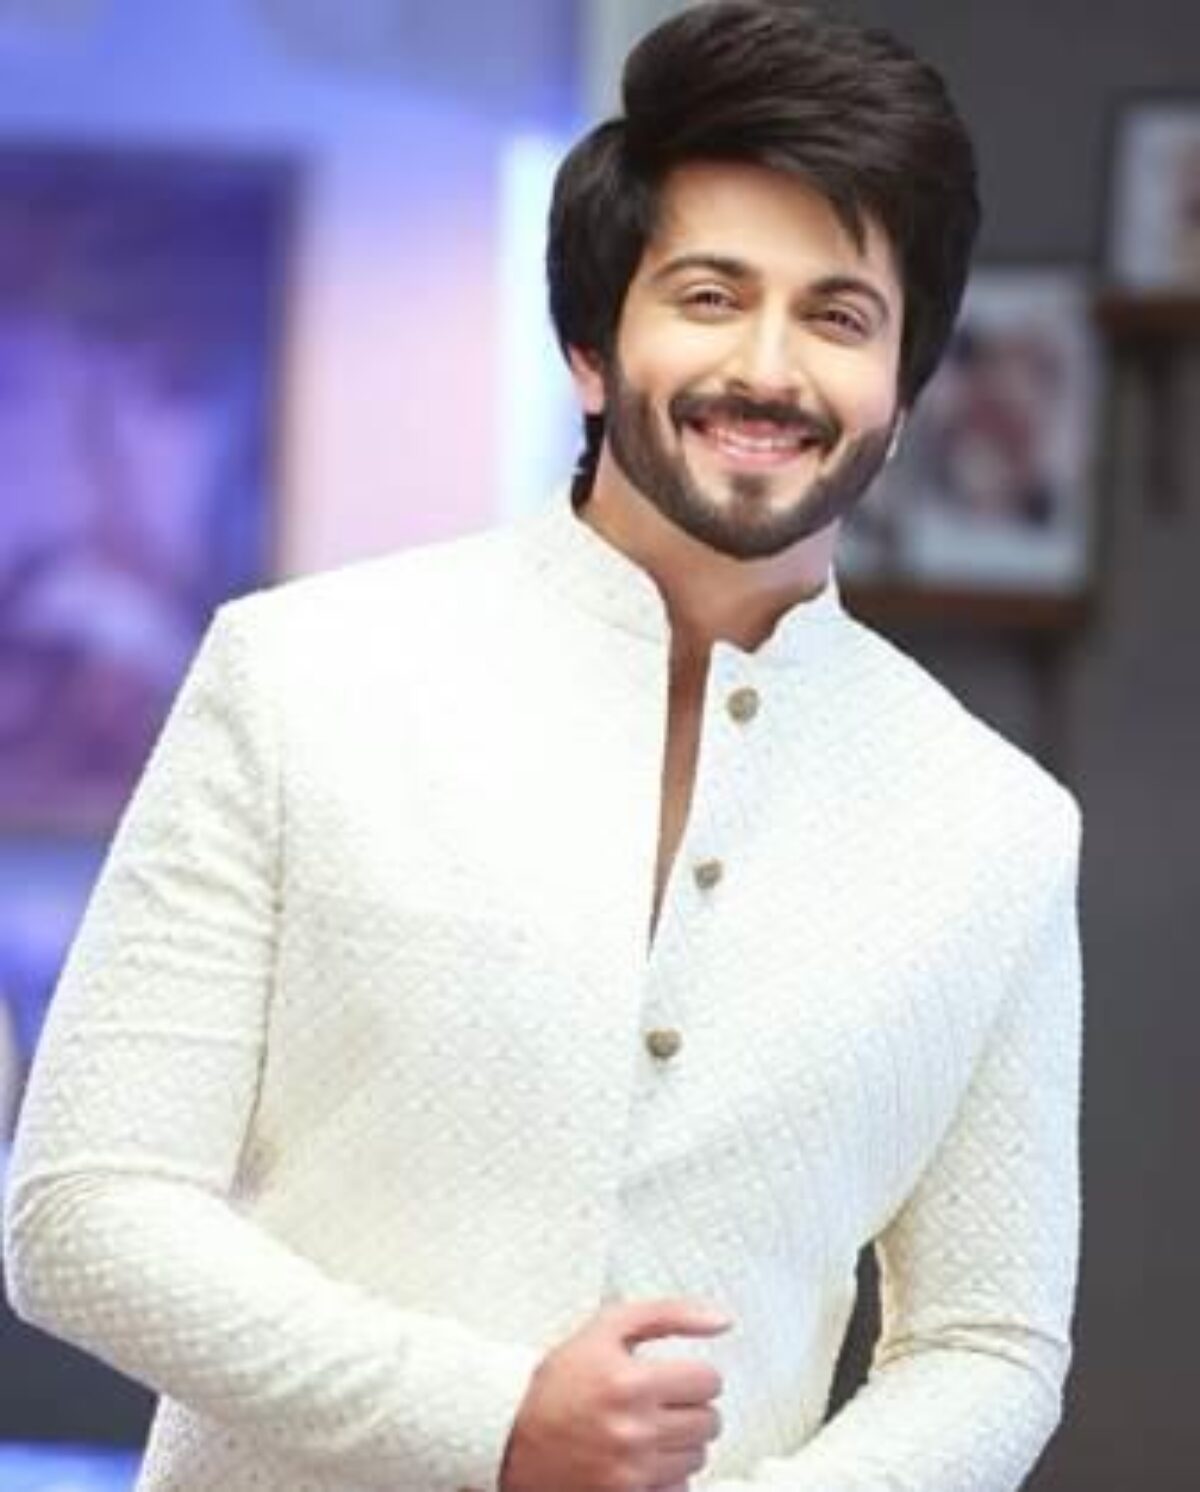 Kundali Bhagyas Dheeraj Dhoopar bags the Most Charismatic Performer Of The  Year Award  Bollywood News  Gossip Movie Reviews Trailers  Videos at  Bollywoodlifecom